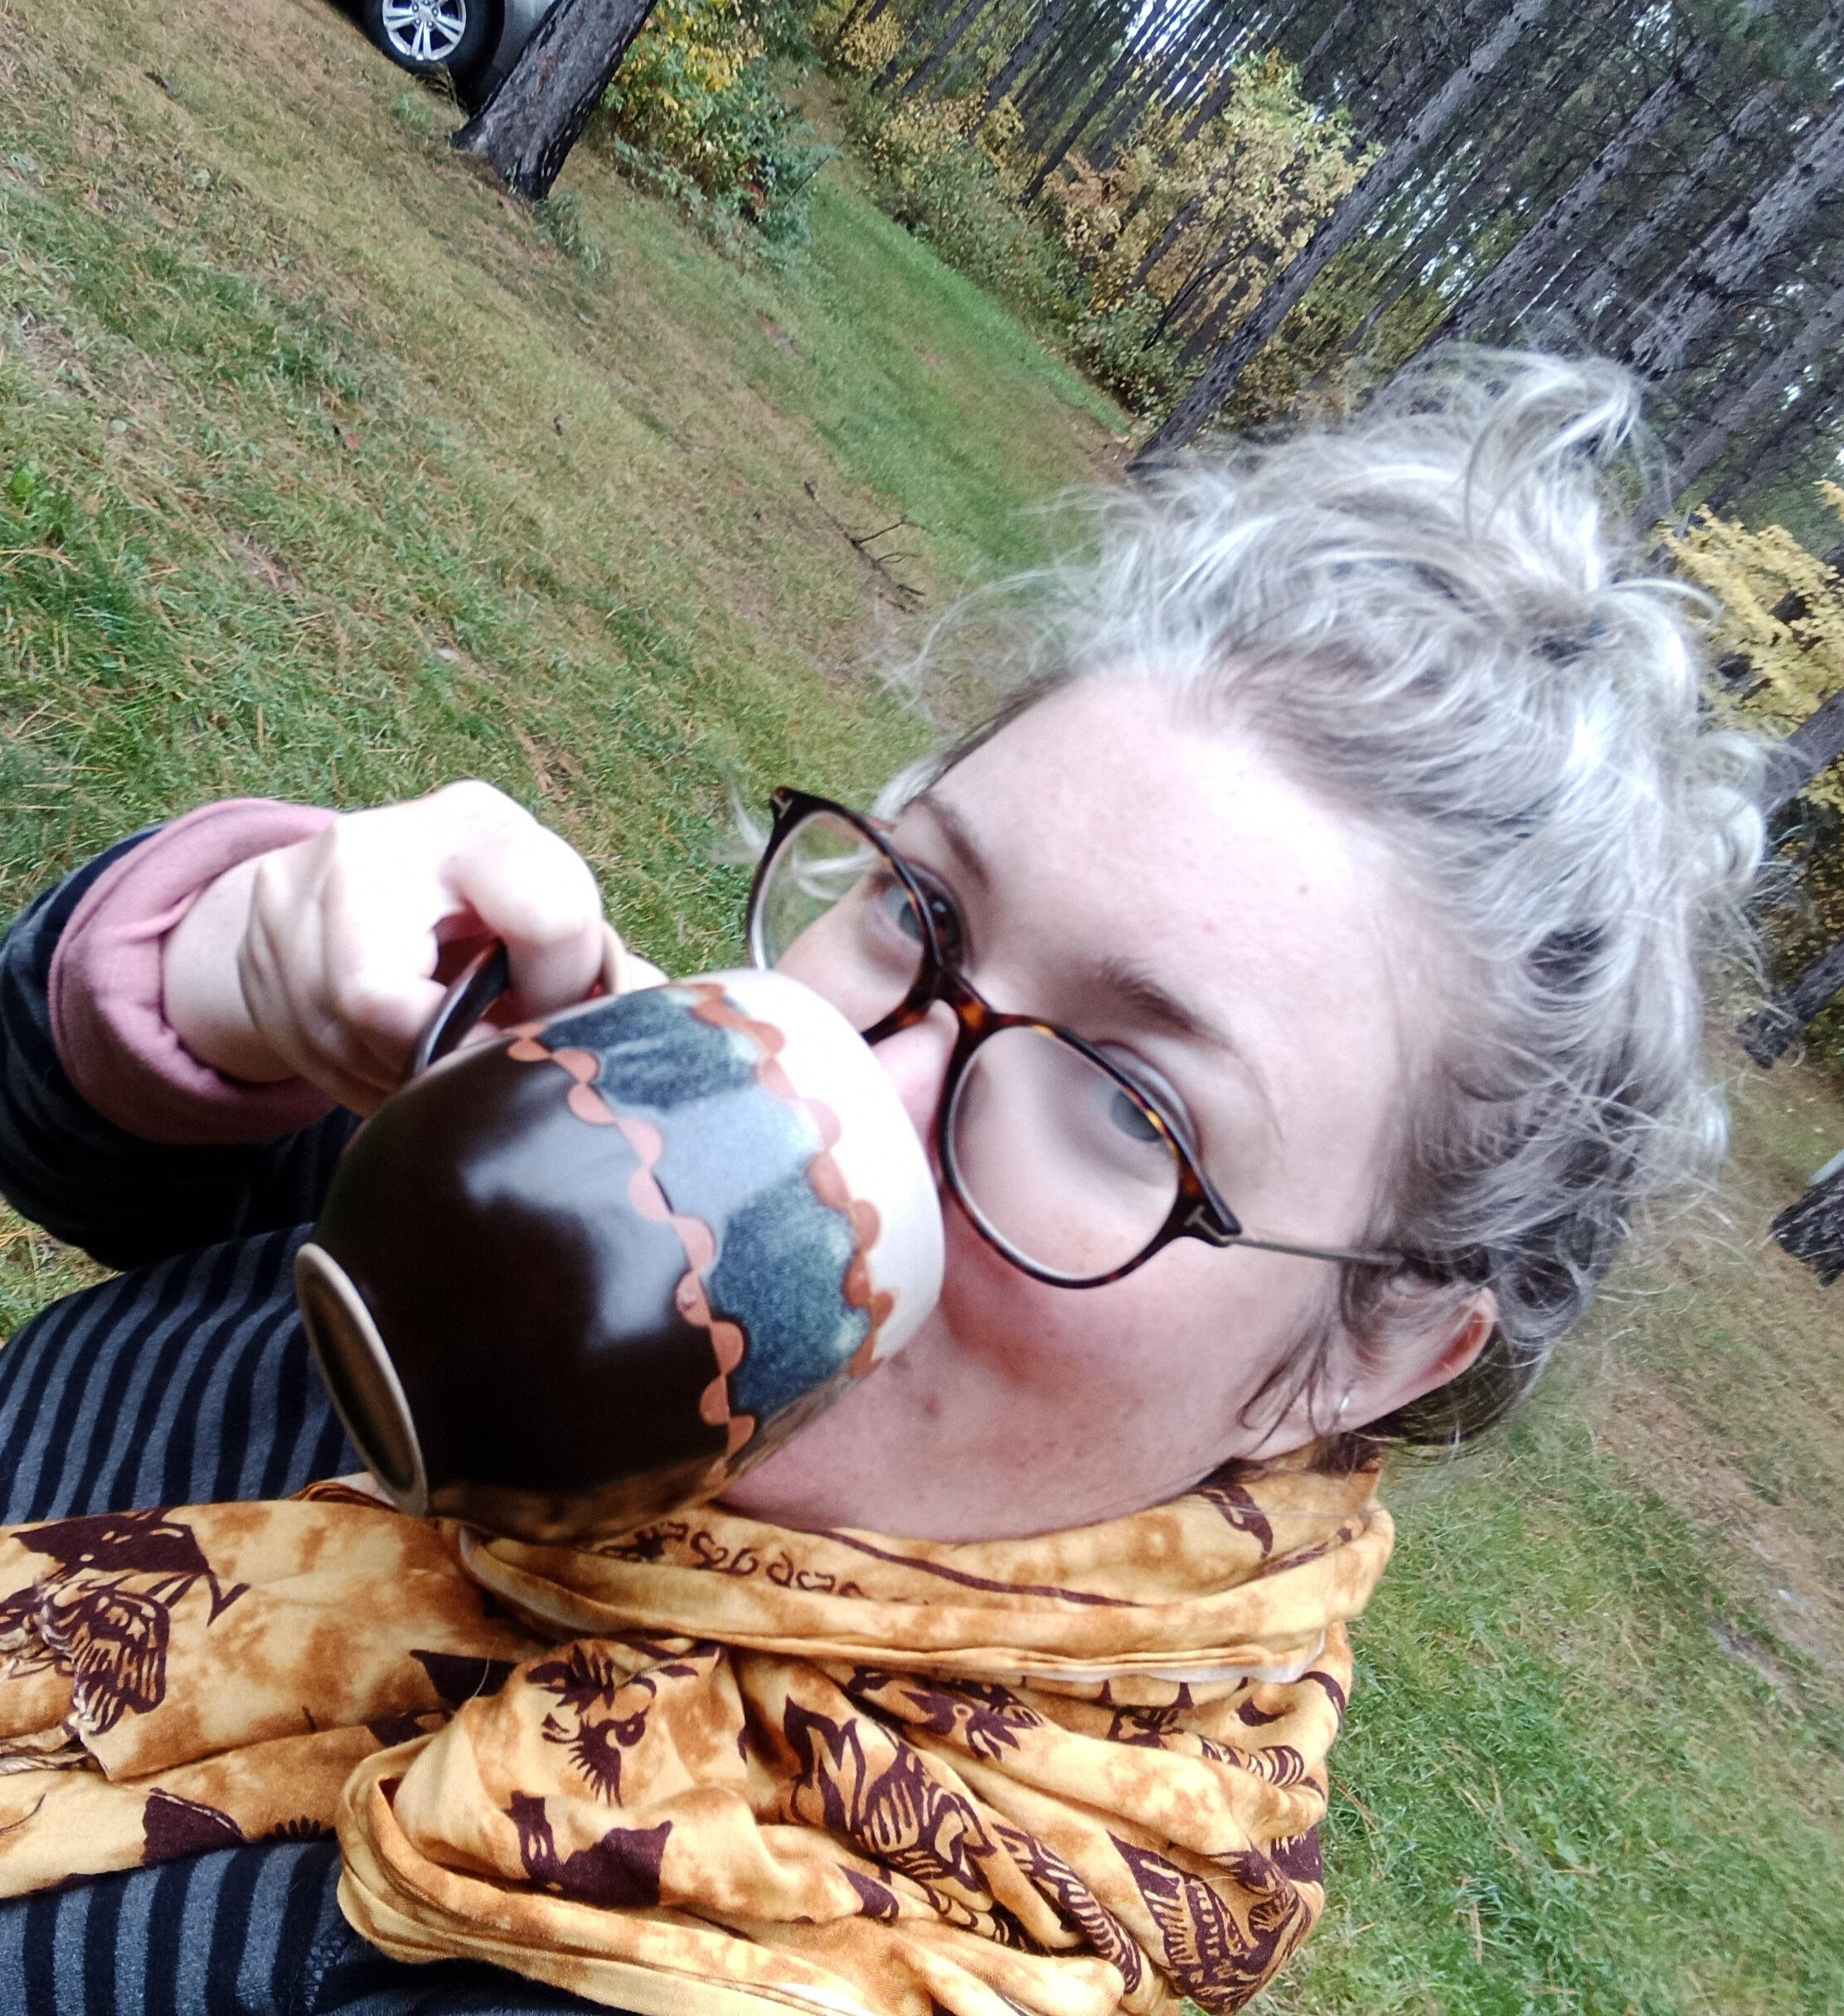 Libby Walkup holding drinking from coffee mug. Pine trees in the background.